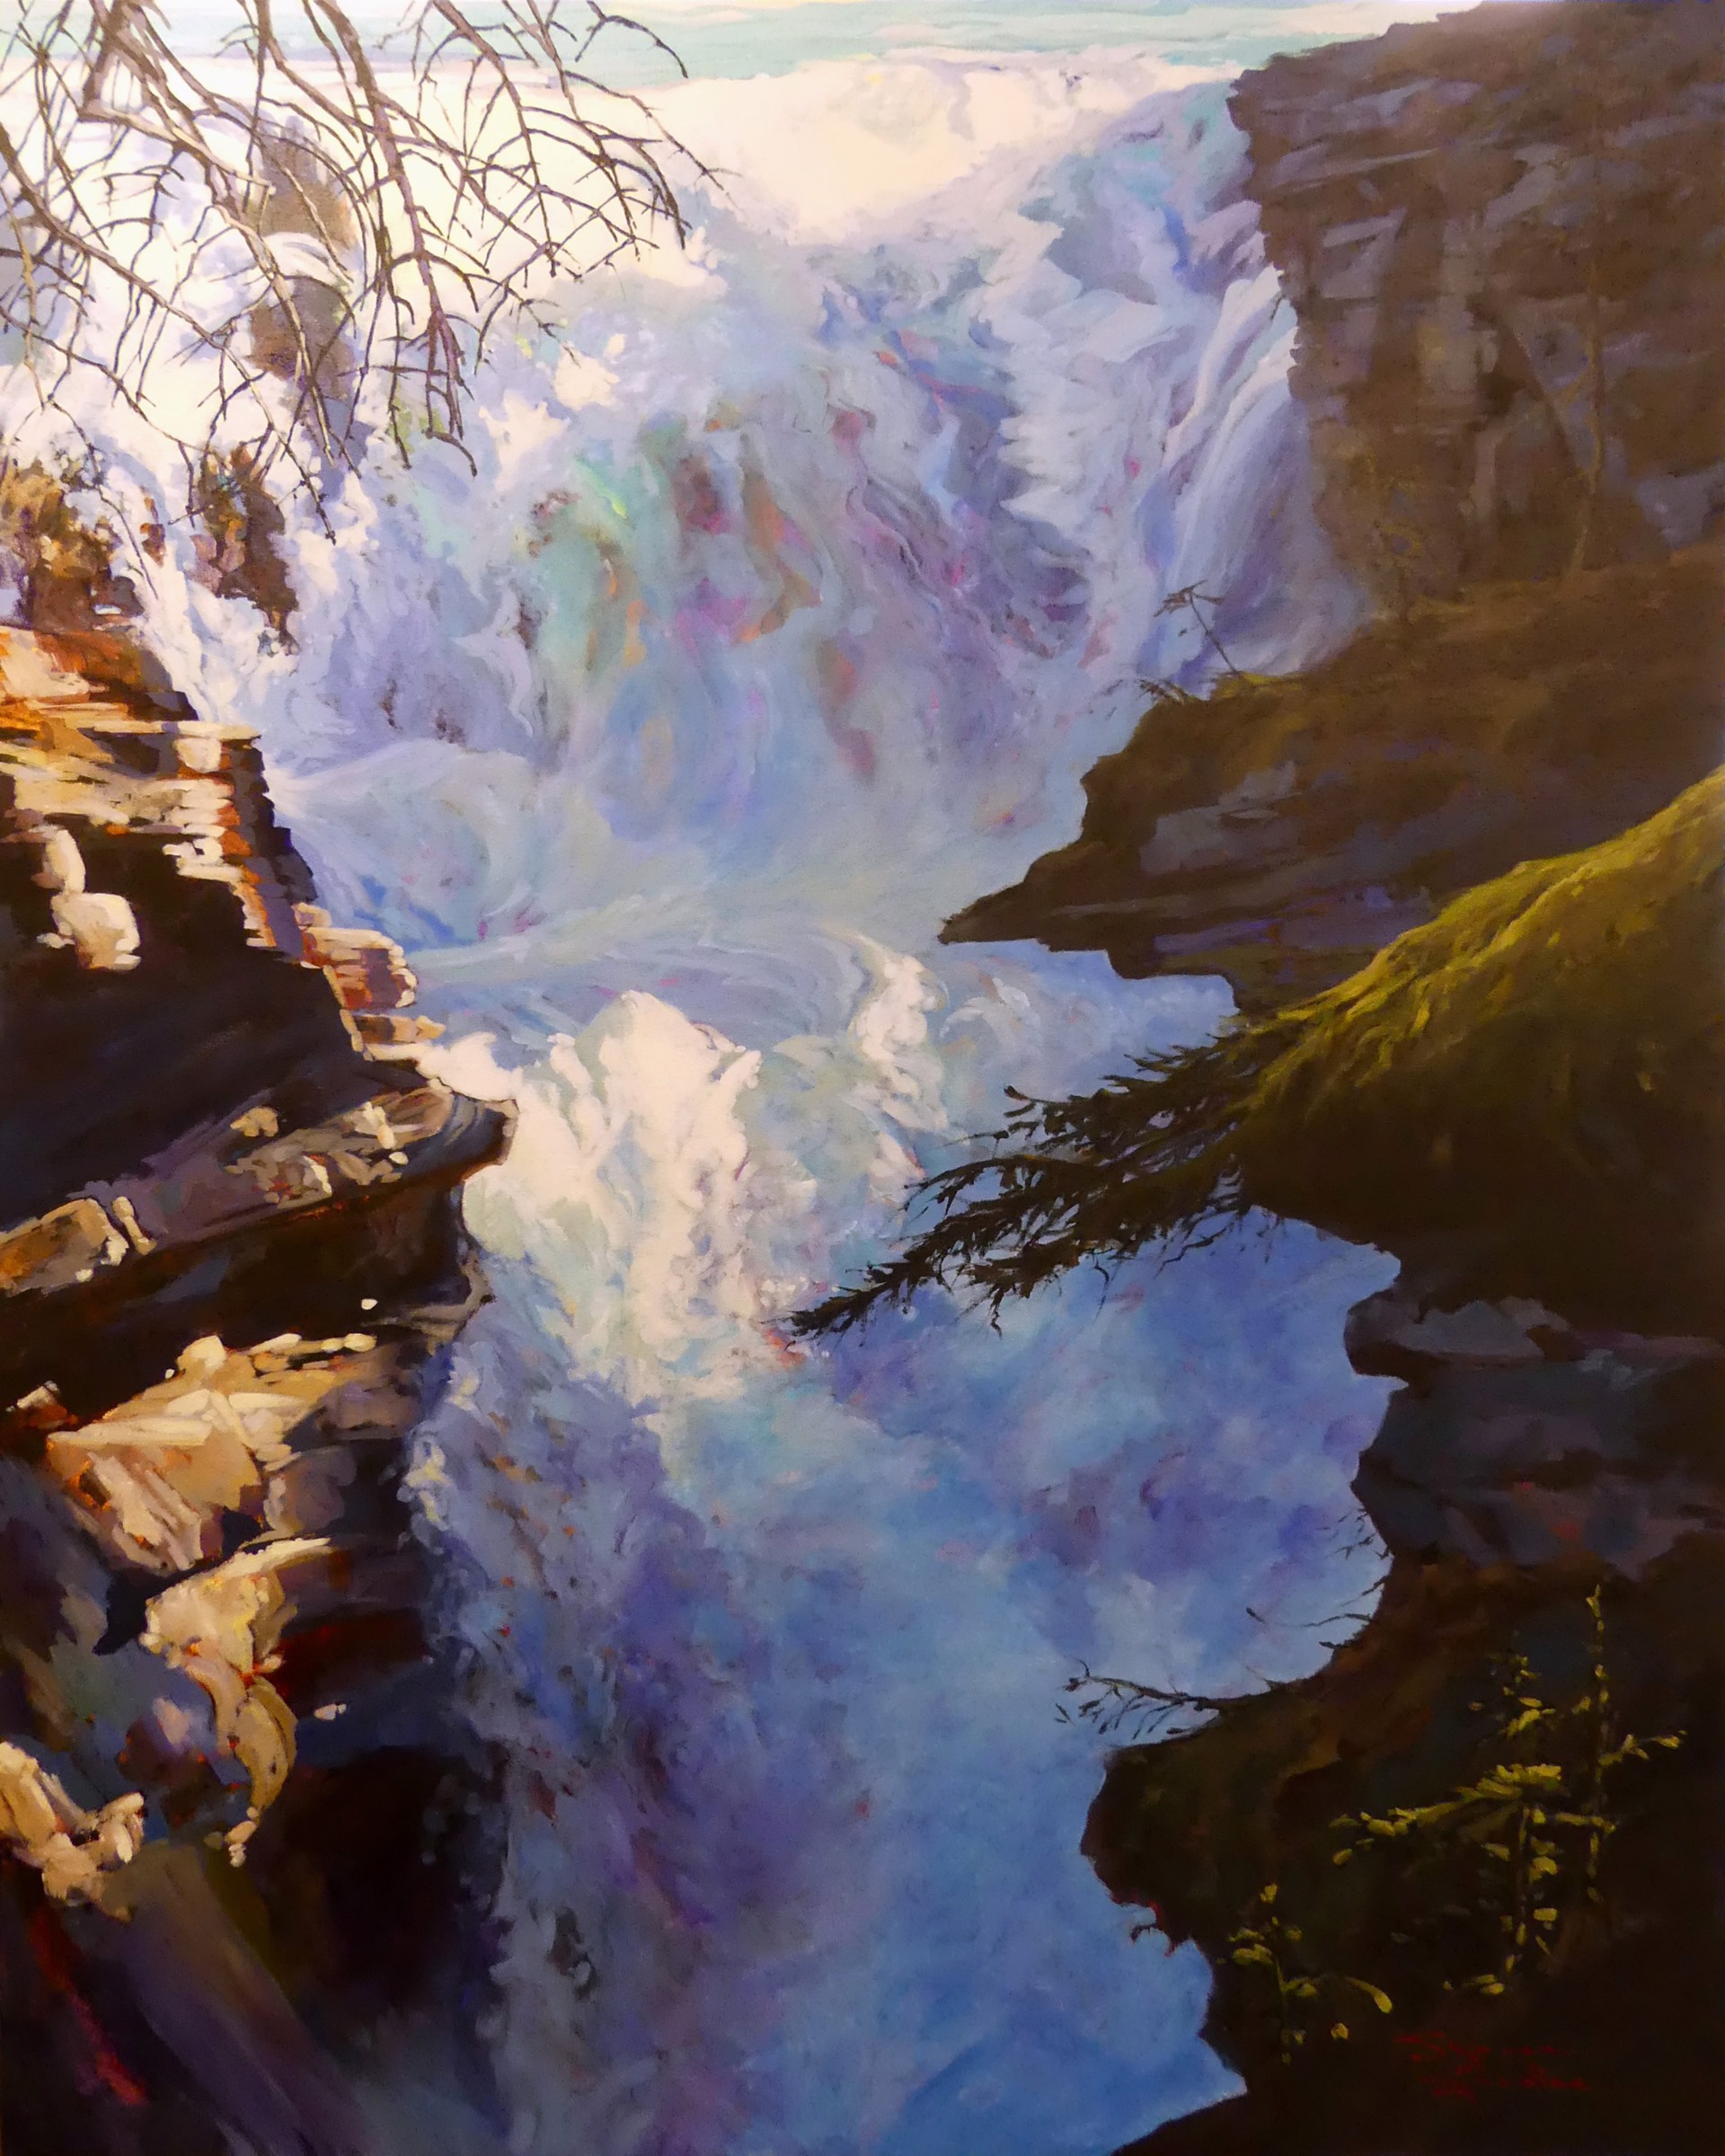 Over the Edge, Athabasca Falls by Suzanne Sandboe